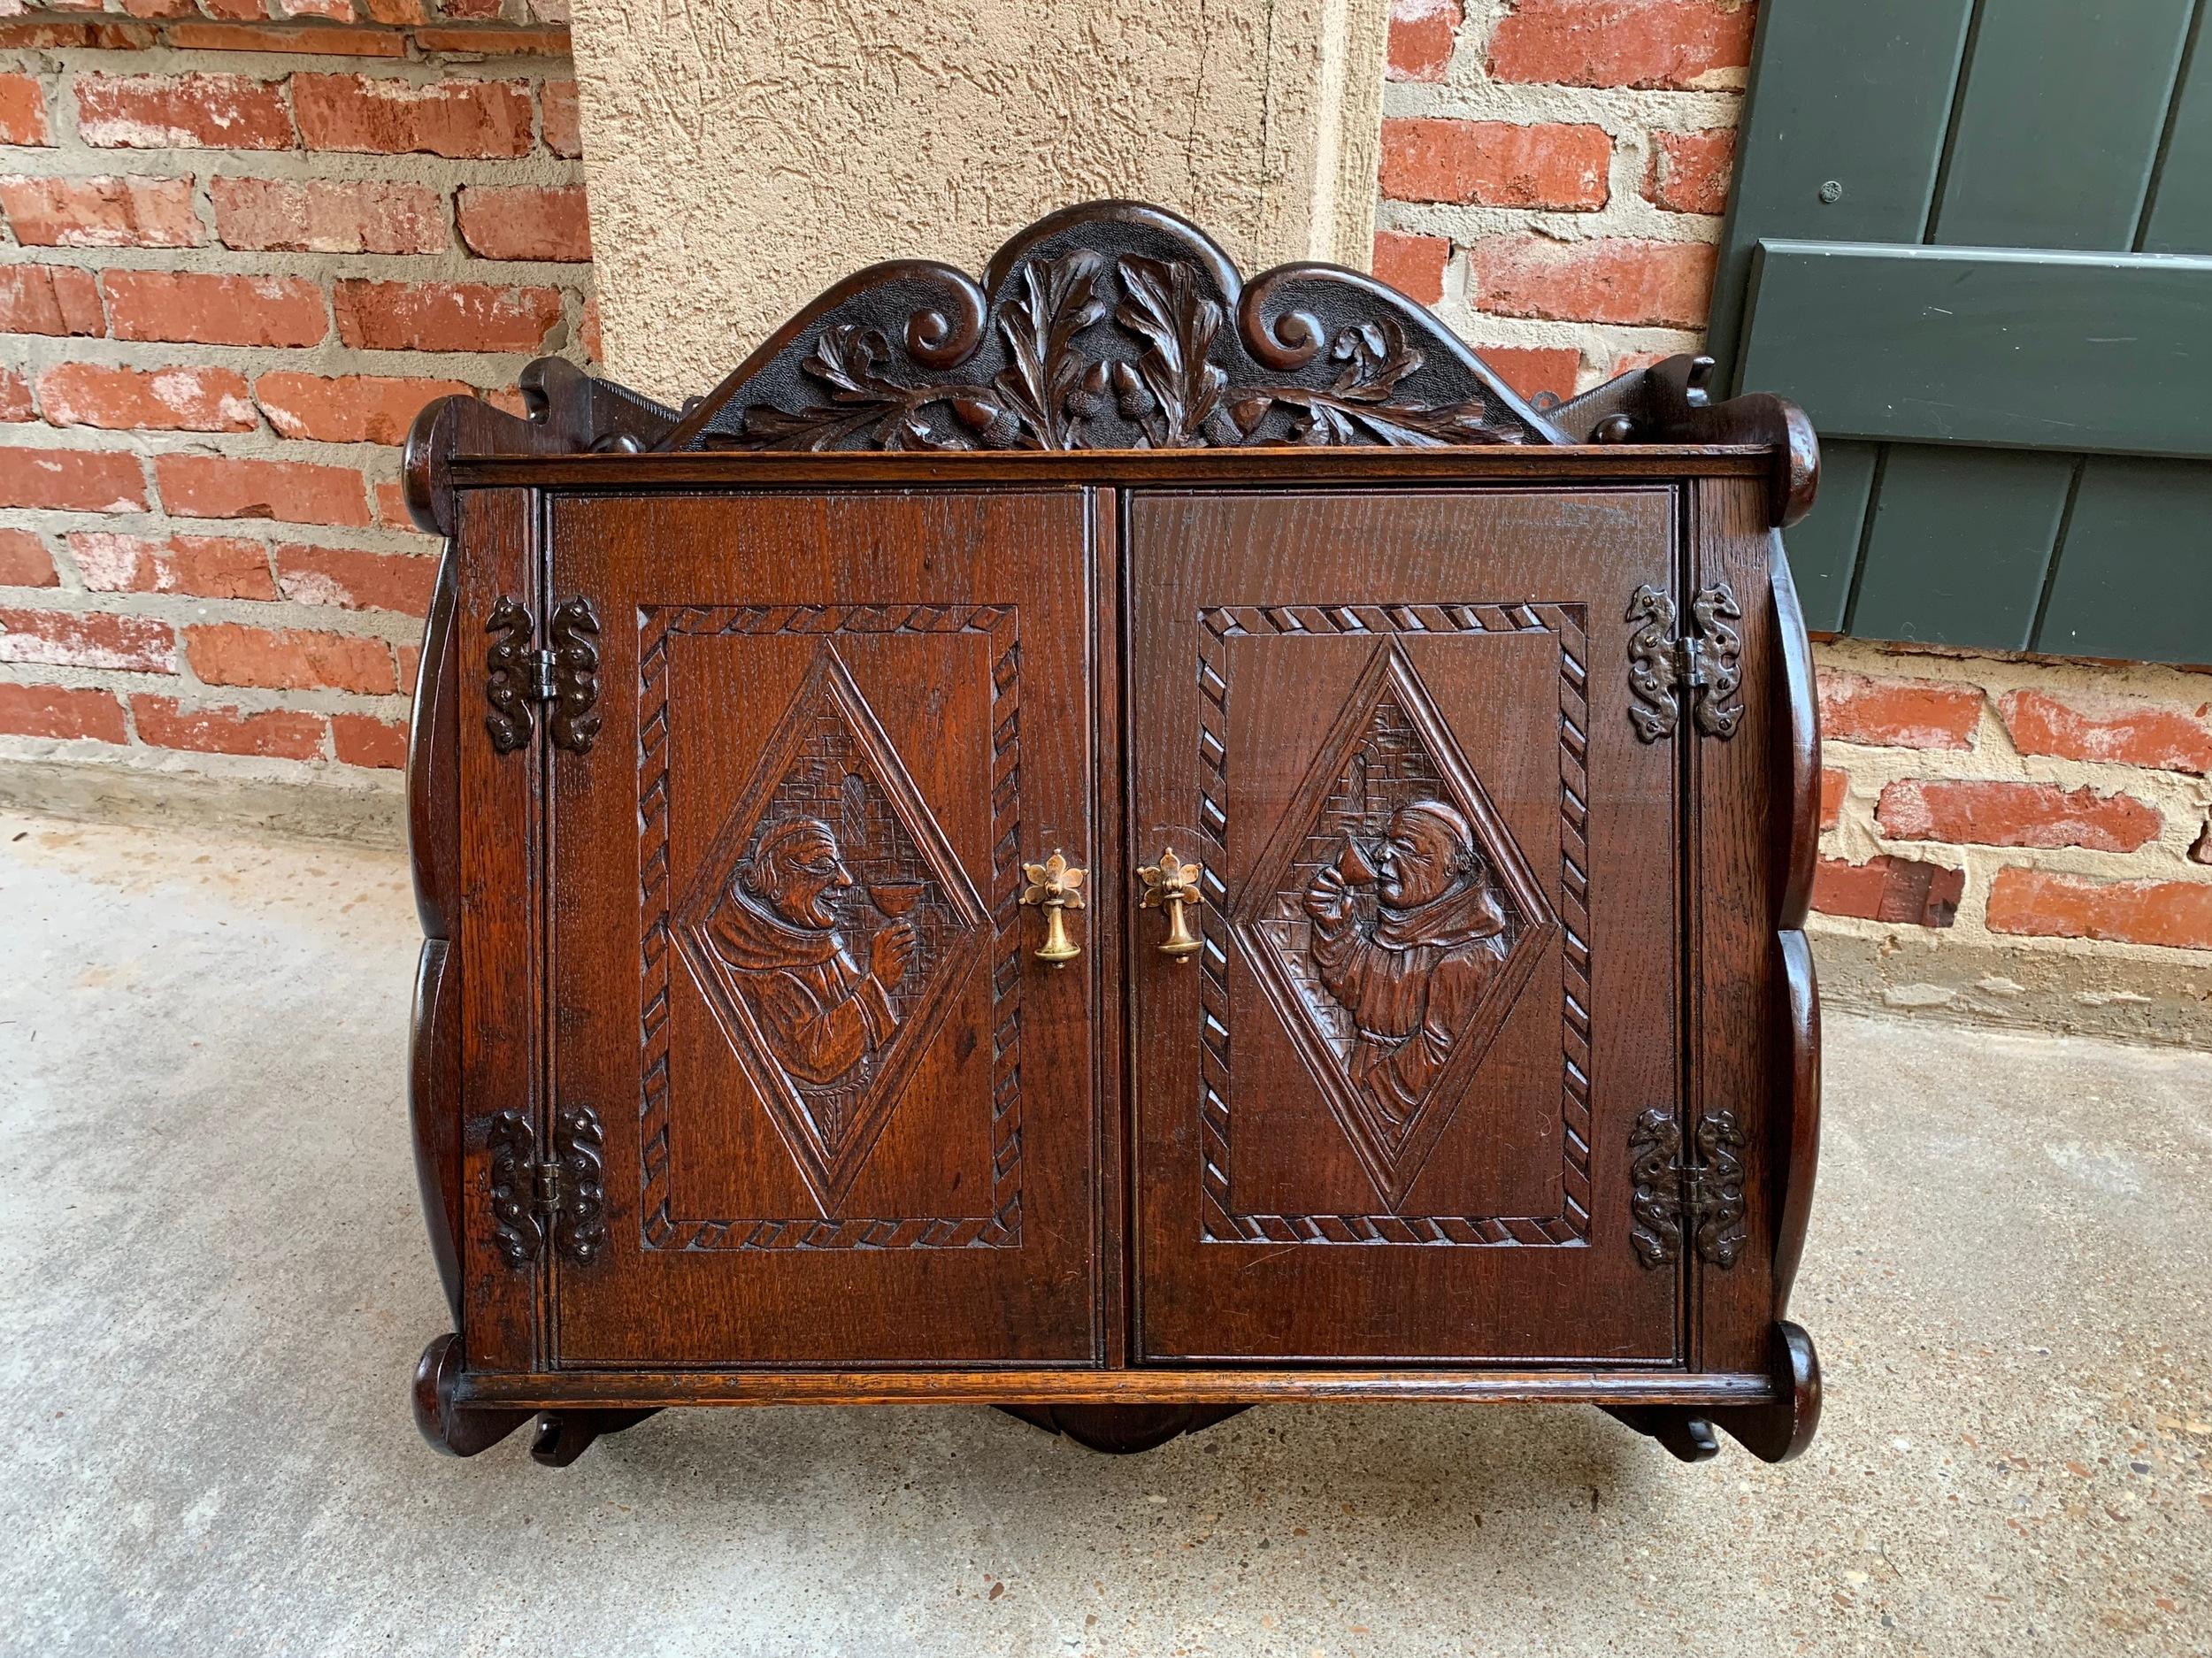 ~Direct from France~
~A fabulous antique French dark oak wall cabinet, loaded with hand carved craftsmanship, and a versatile size for so many different places in your home!~
~Tall, thick, hand carved serpentine crown features foliage and acorns;